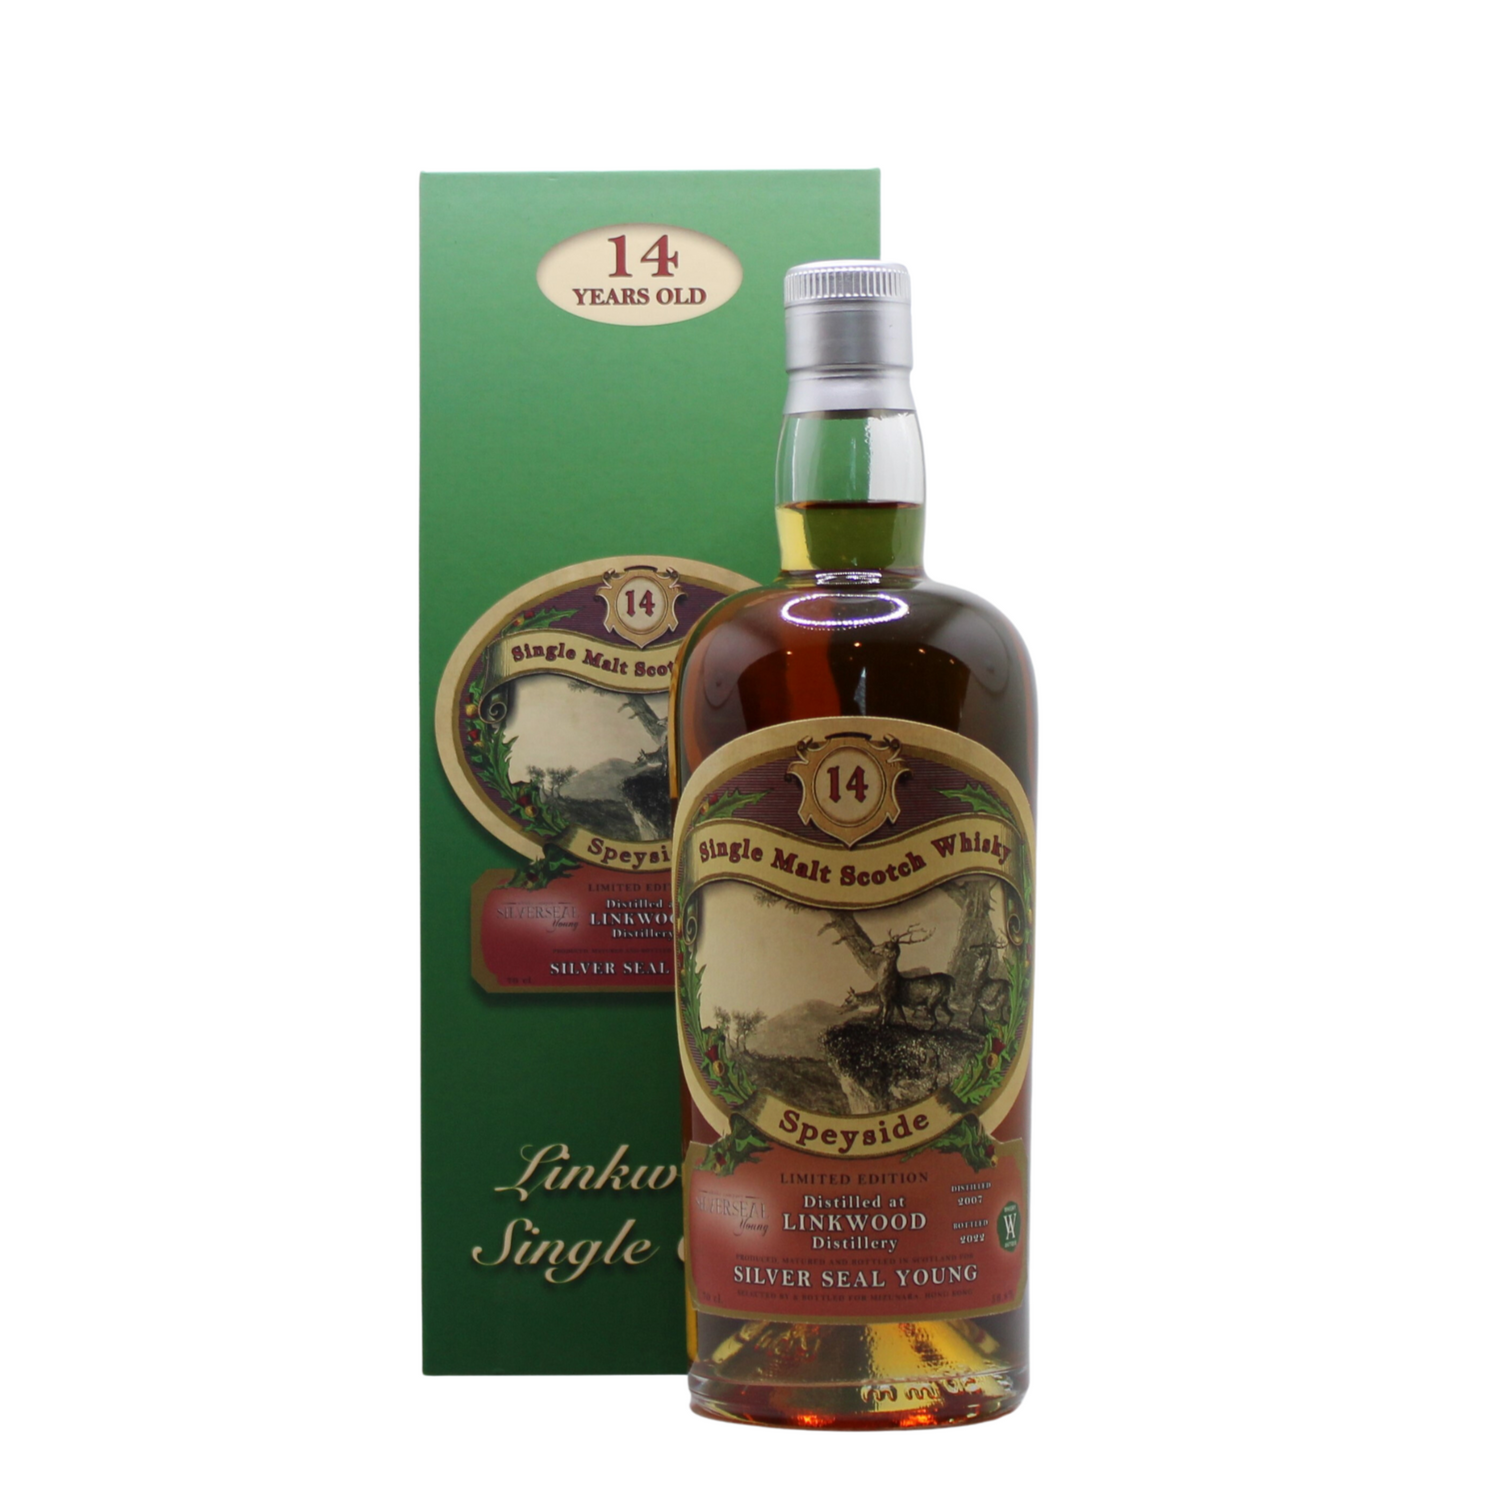 This Whisky from Linkwood Distillery, distilled in 2007 and bottled in 2022 is matured in a single cask #4103 and bottled at Natural Cask Strength of 56.8% ABV. Only 251 bottles were released. Nose: Fresh green fruits, pear, crunchy apple, caramel, honey and plums Taste: Initial sweetness is balanced with fruity plum and some hot spices Finish: Spices, hint of cardamom and black tea with a warming finish (medium- long).